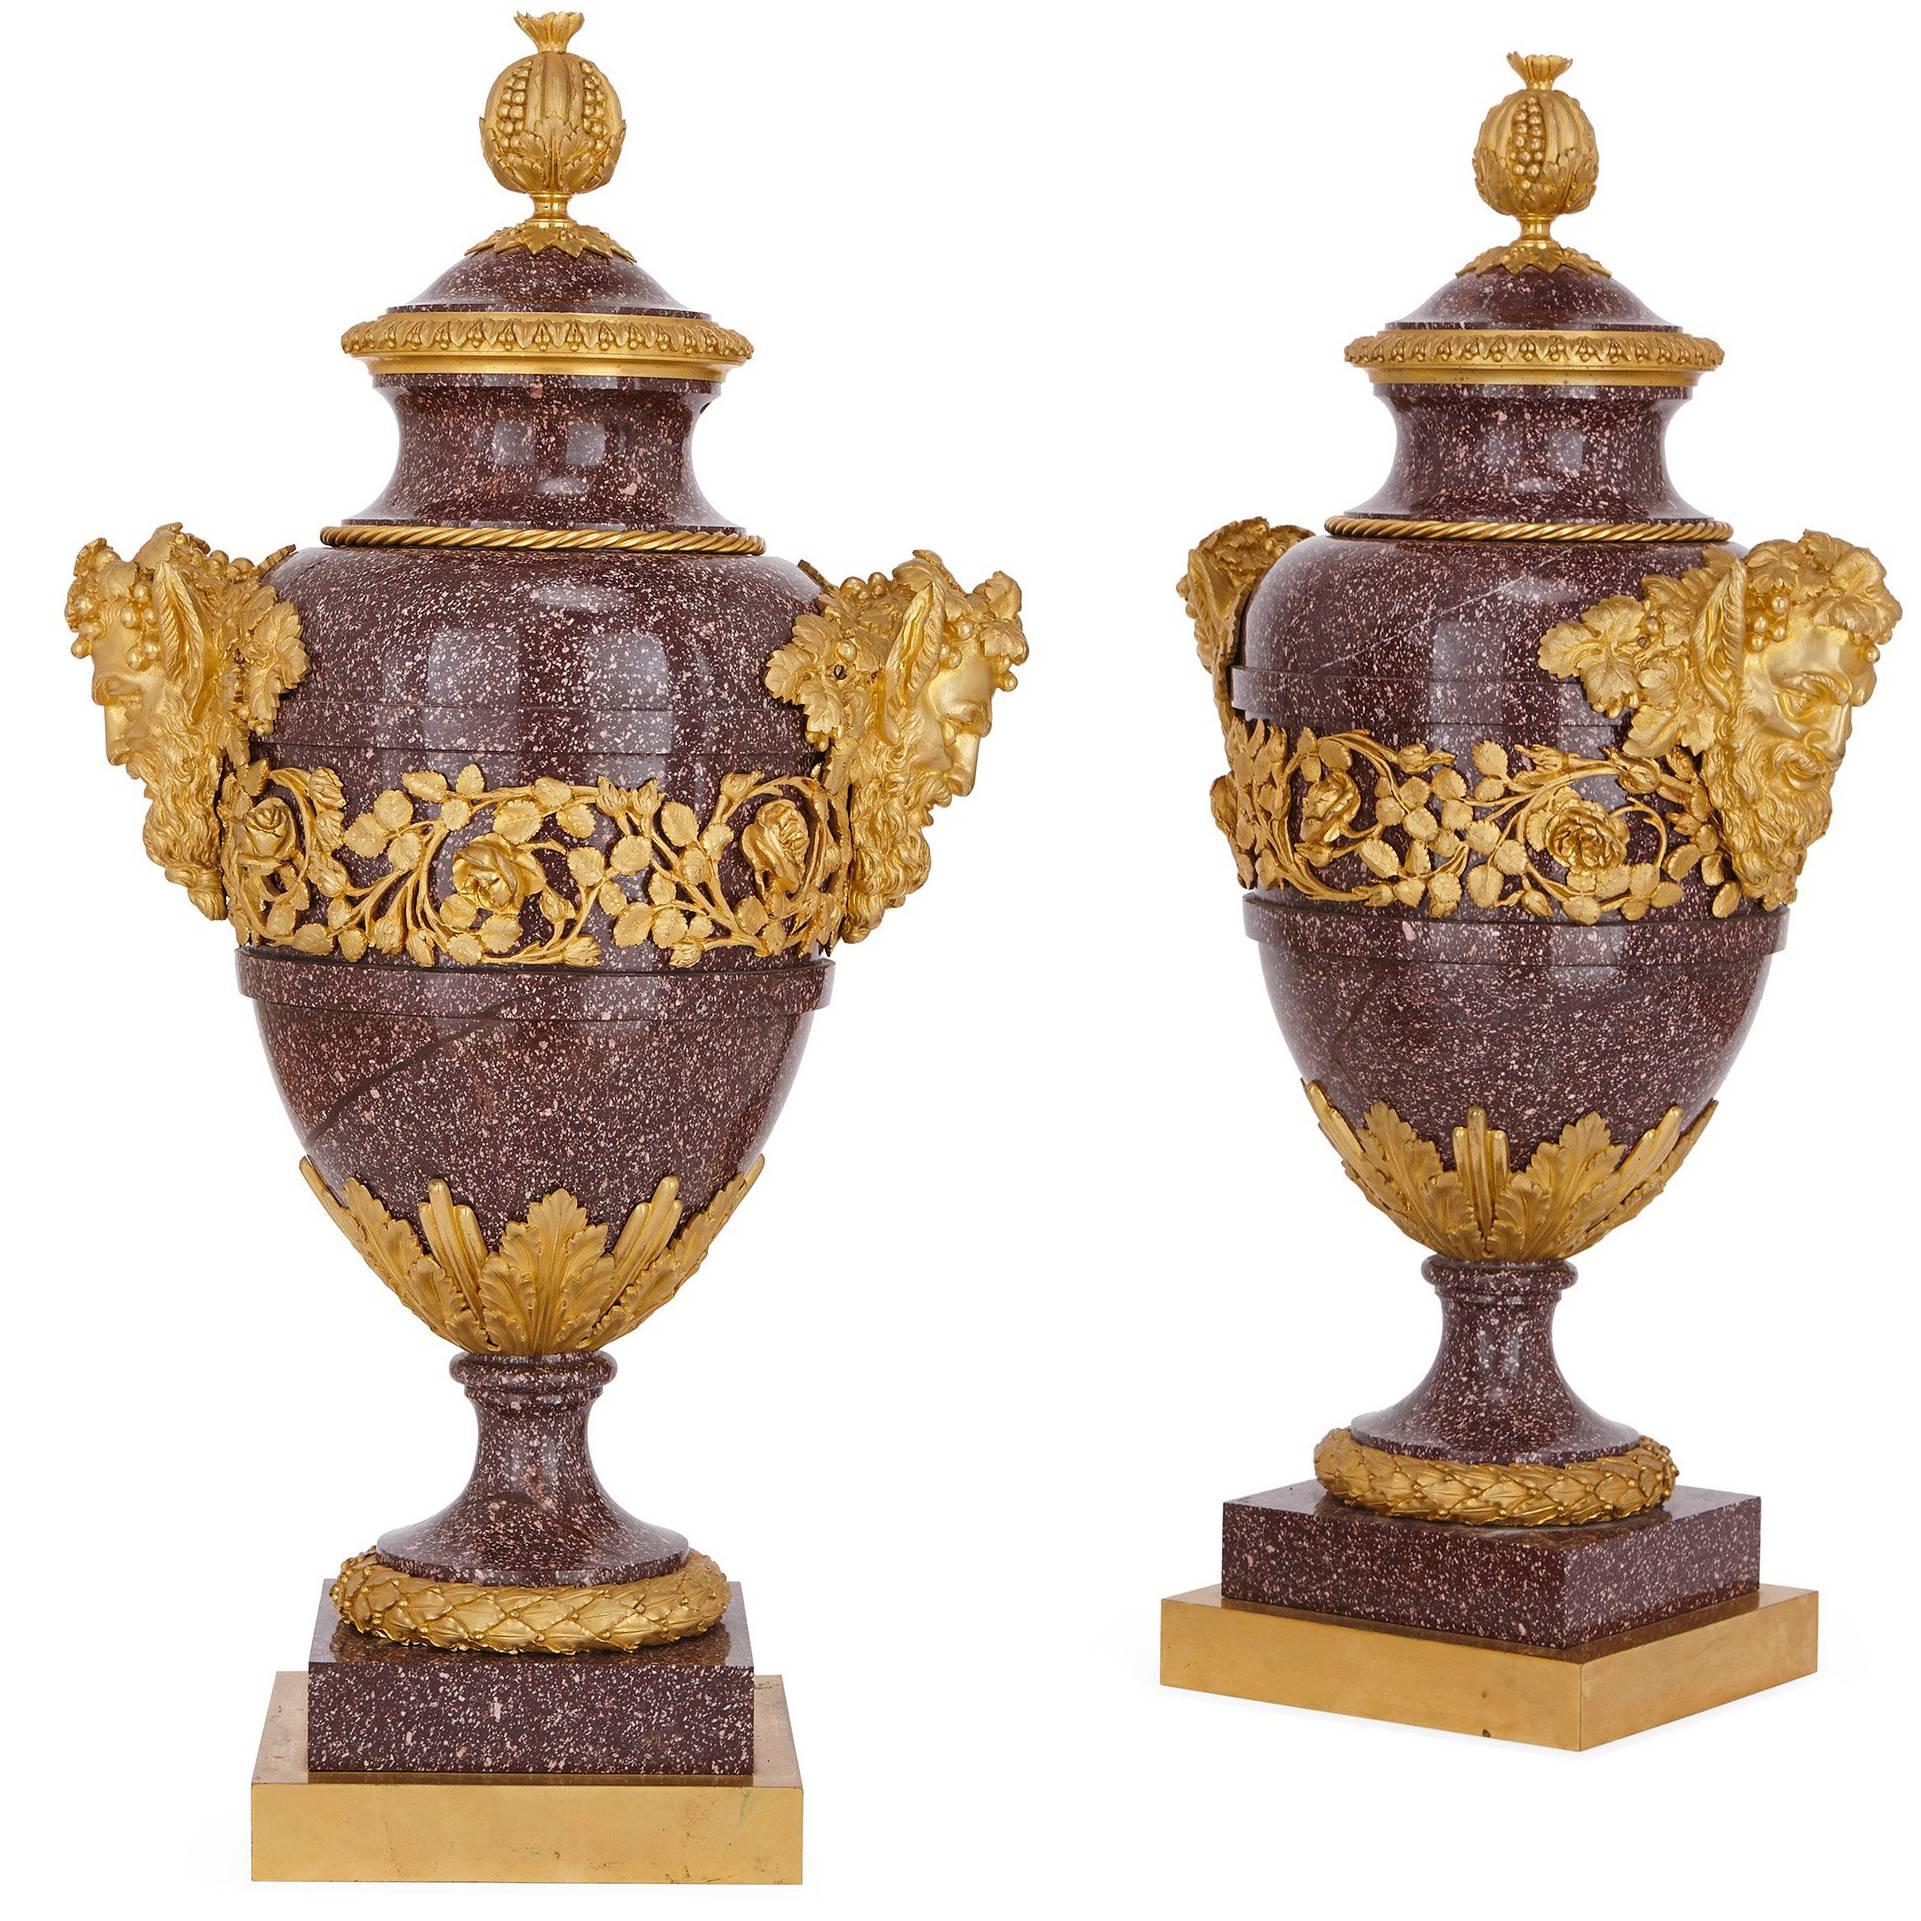 Pair of French Antique Gilt Bronze Mounted Porphyry Vases